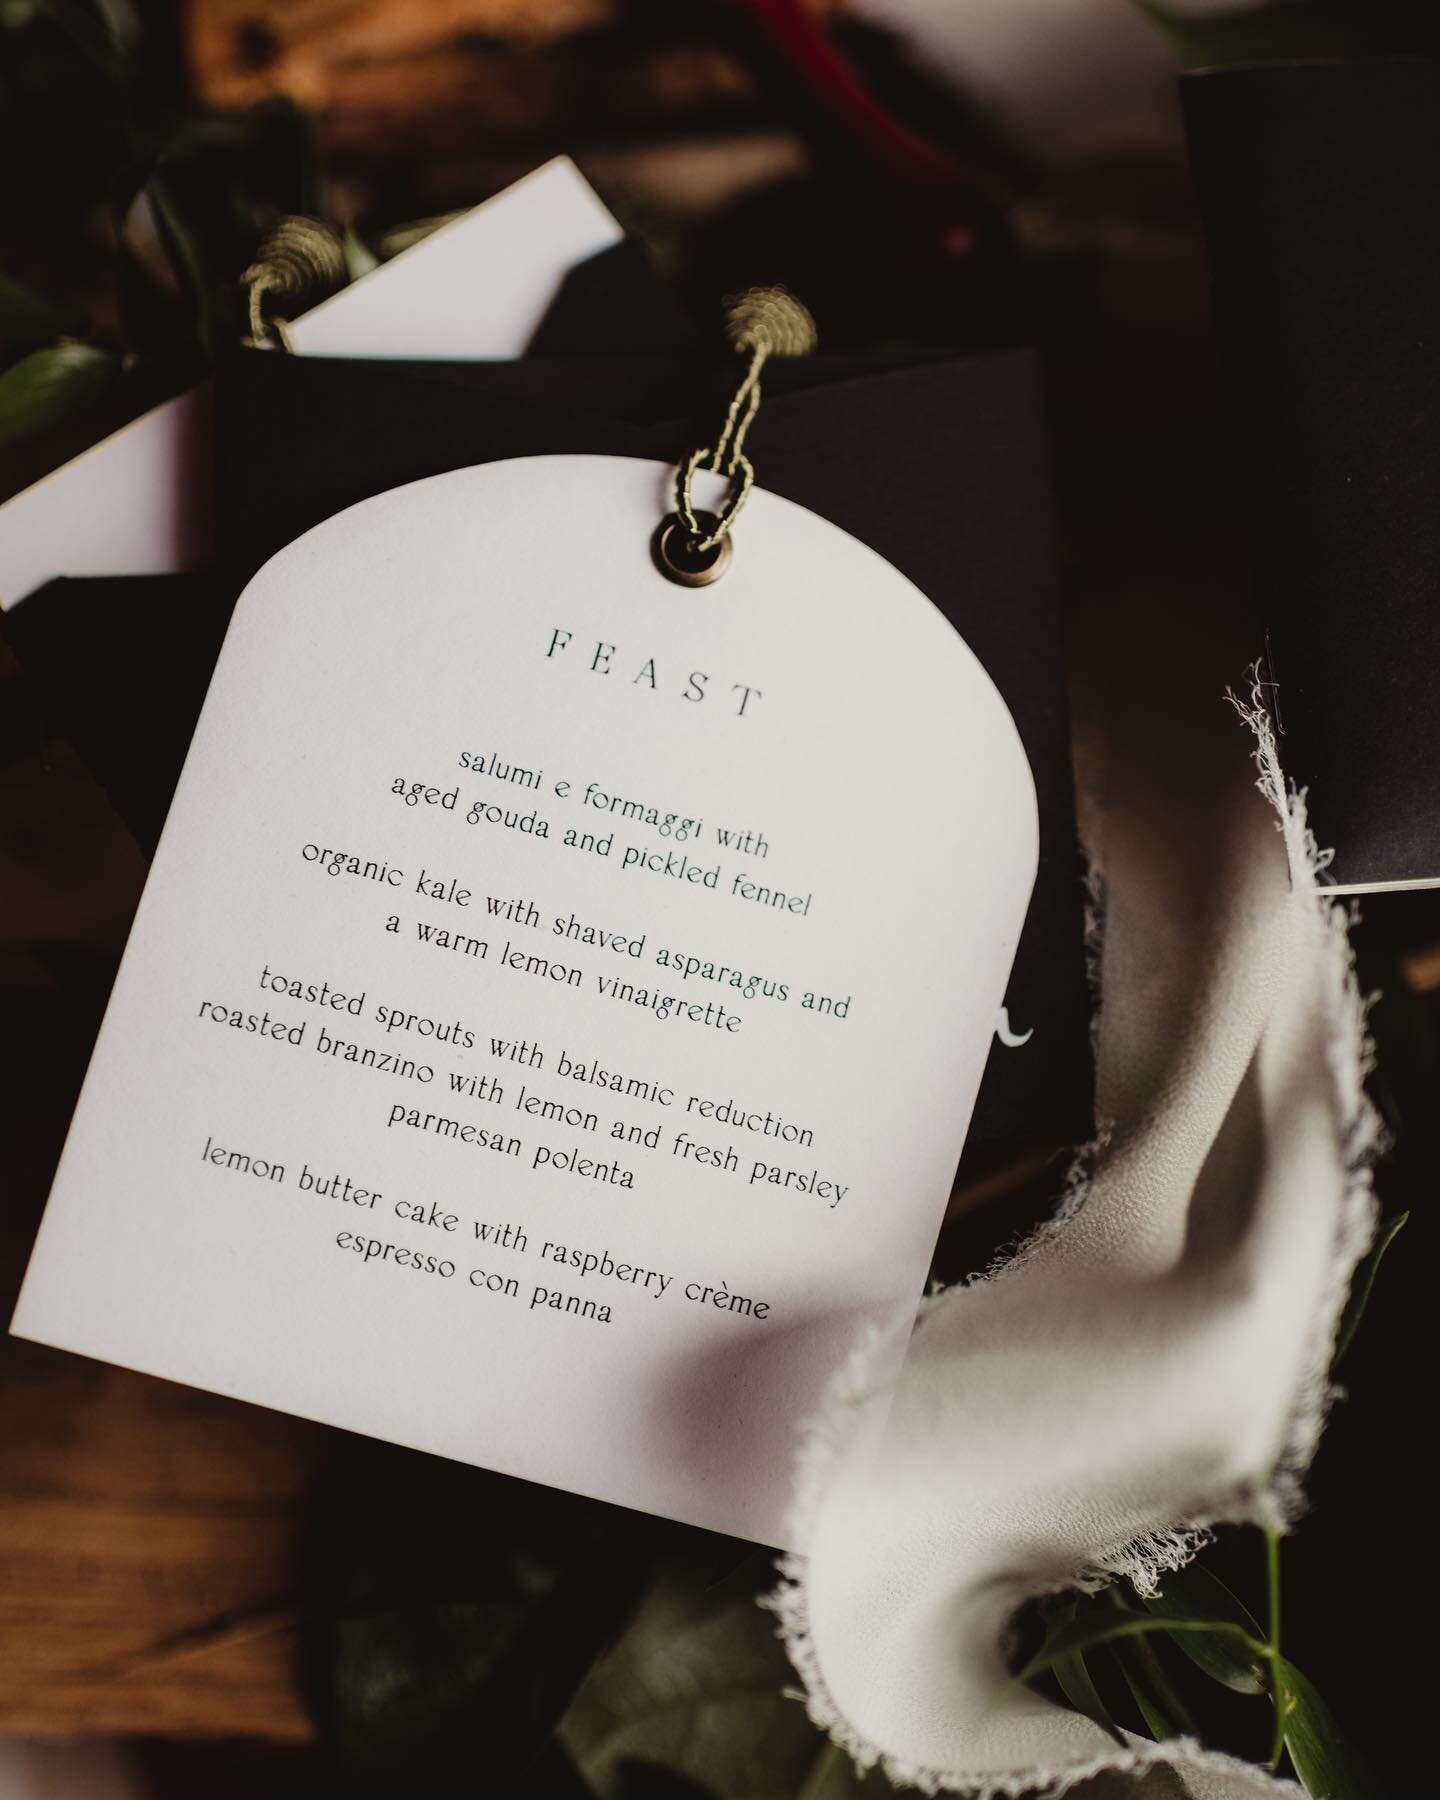 Let your guests delight in their own cute little menu, rather than battle it out for the one in the center of the table. 😉

#weddinginspiration #weddinginspo #wisconsinwedding #oregonwedding #wedplan #wibridemagazine #madison #madisonwedding #milwau